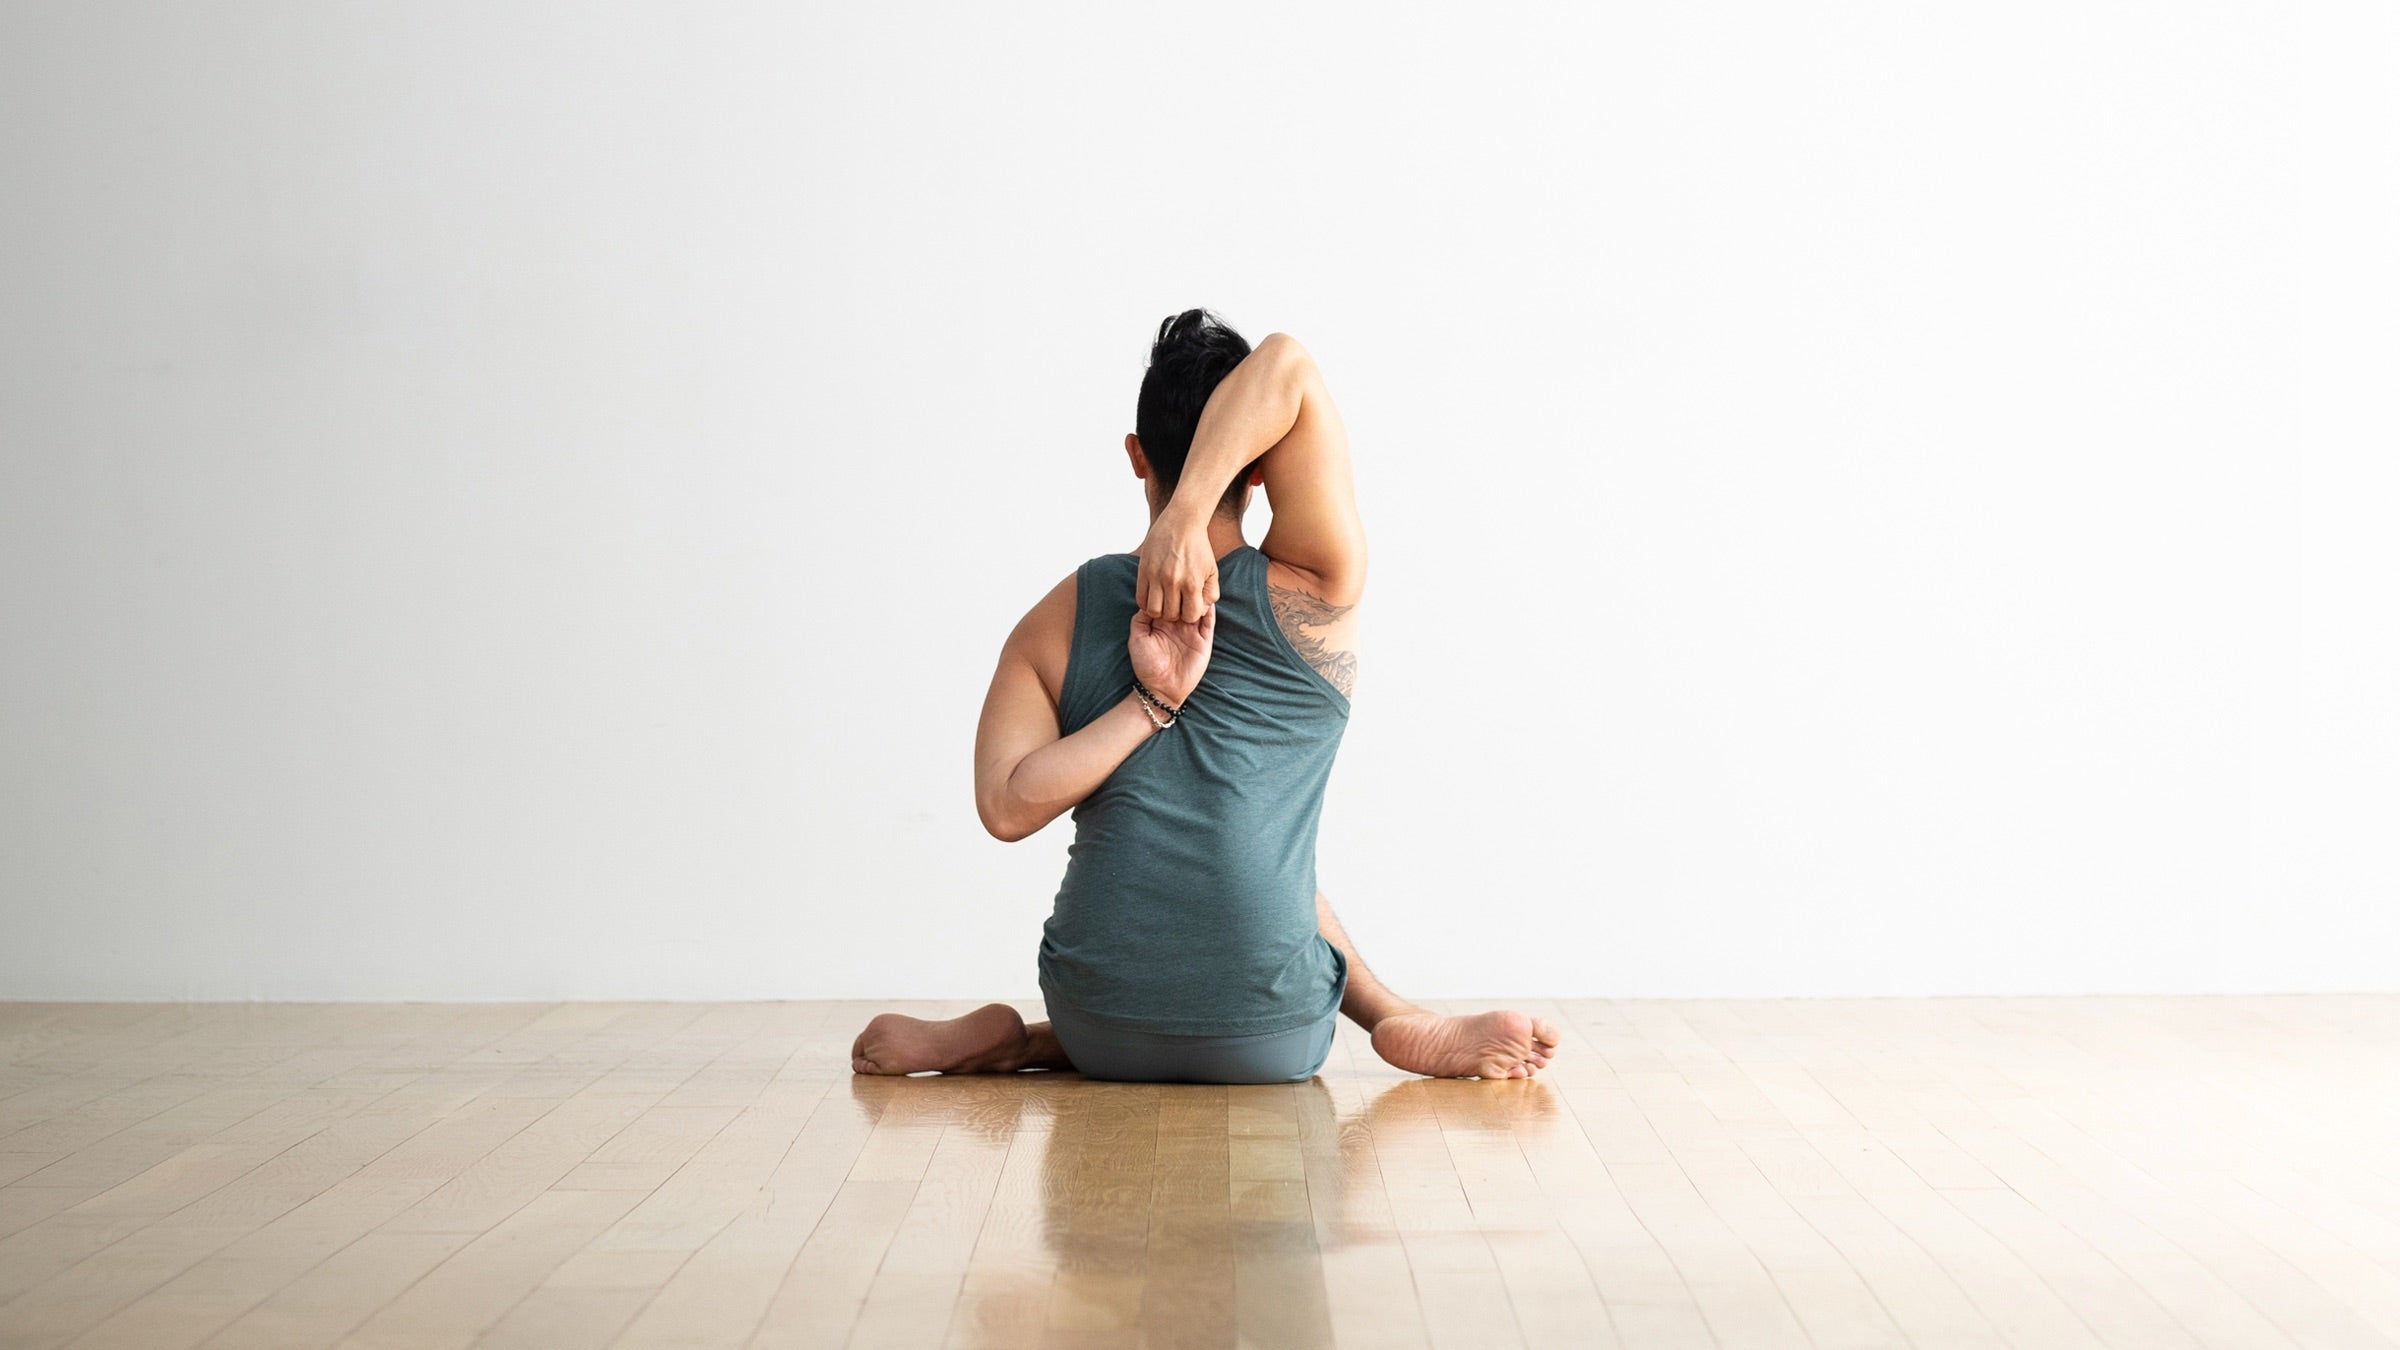 The Best Yoga Poses For Knee Pain Relief | Physiotattva